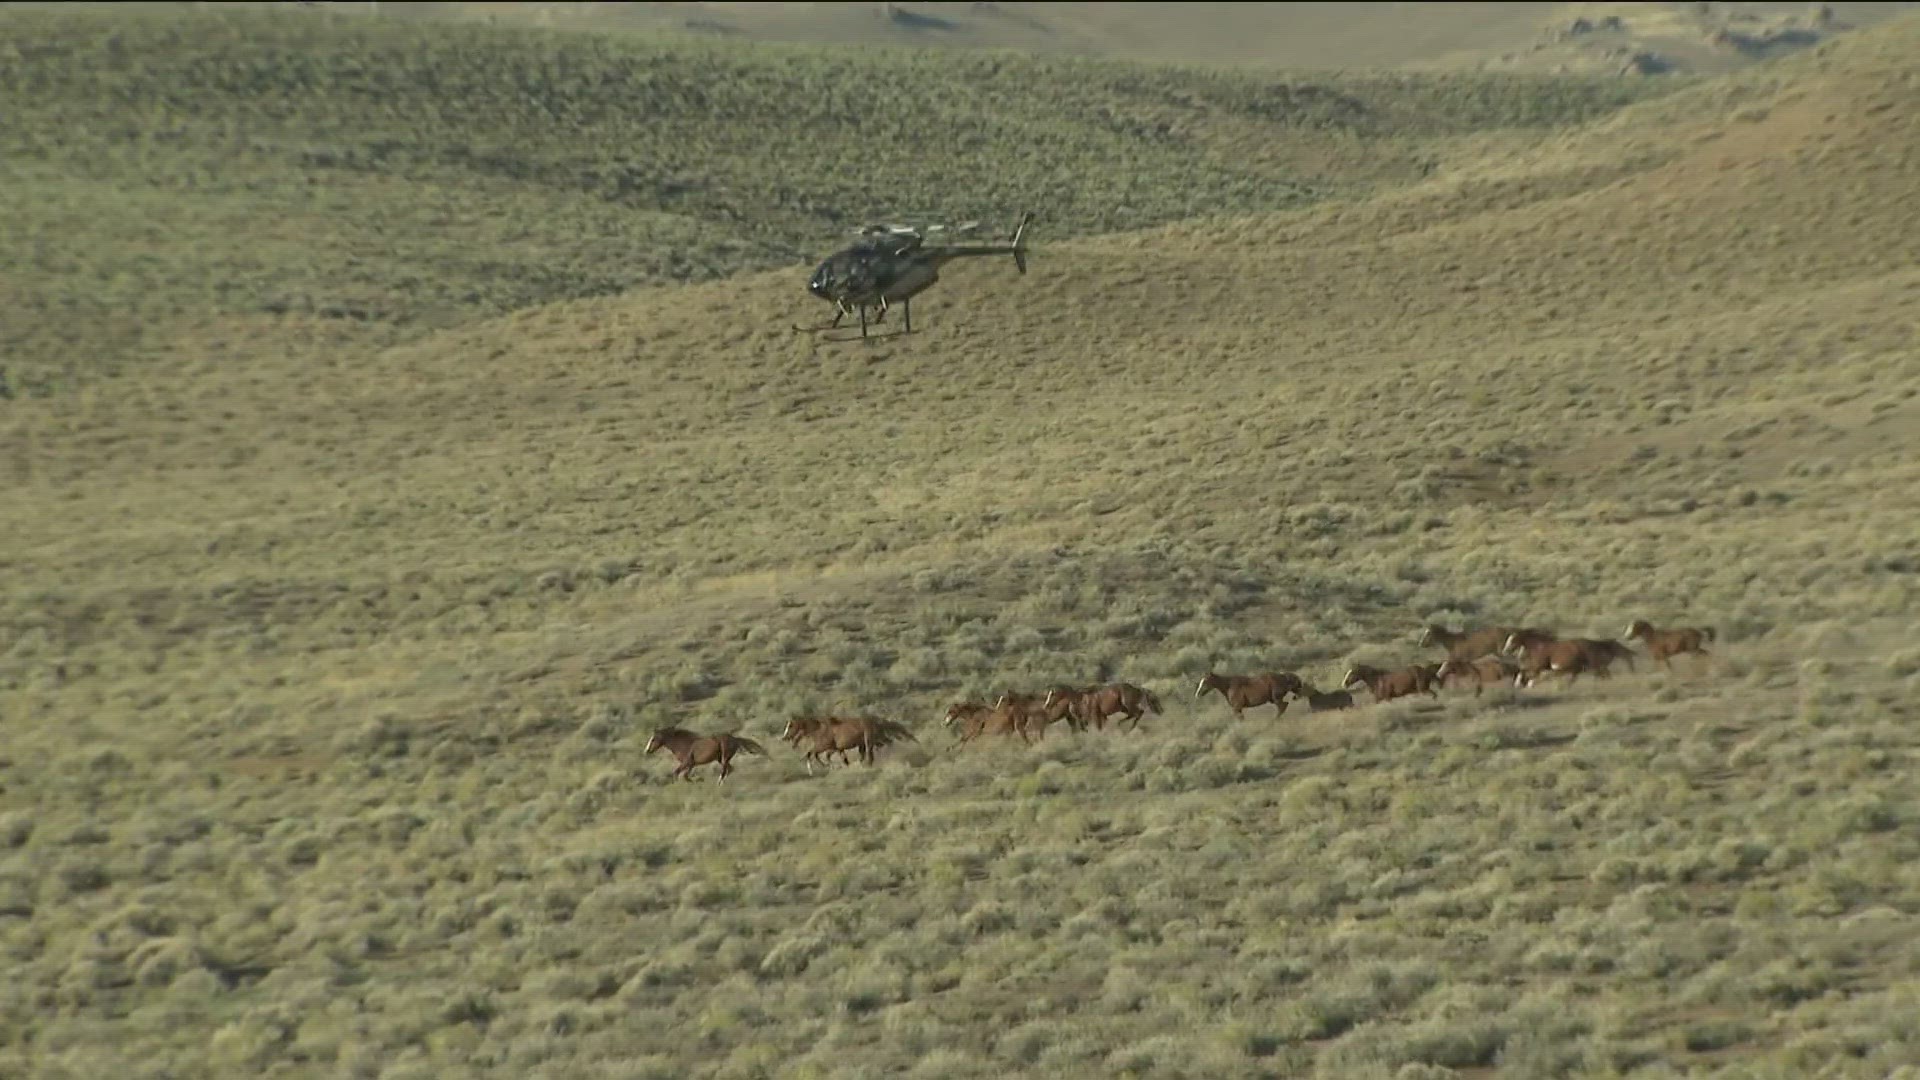 The BLM uses a helicopter to conduct wild horse roundups with the goal of maintaining healthy heard numbers in their management areas.